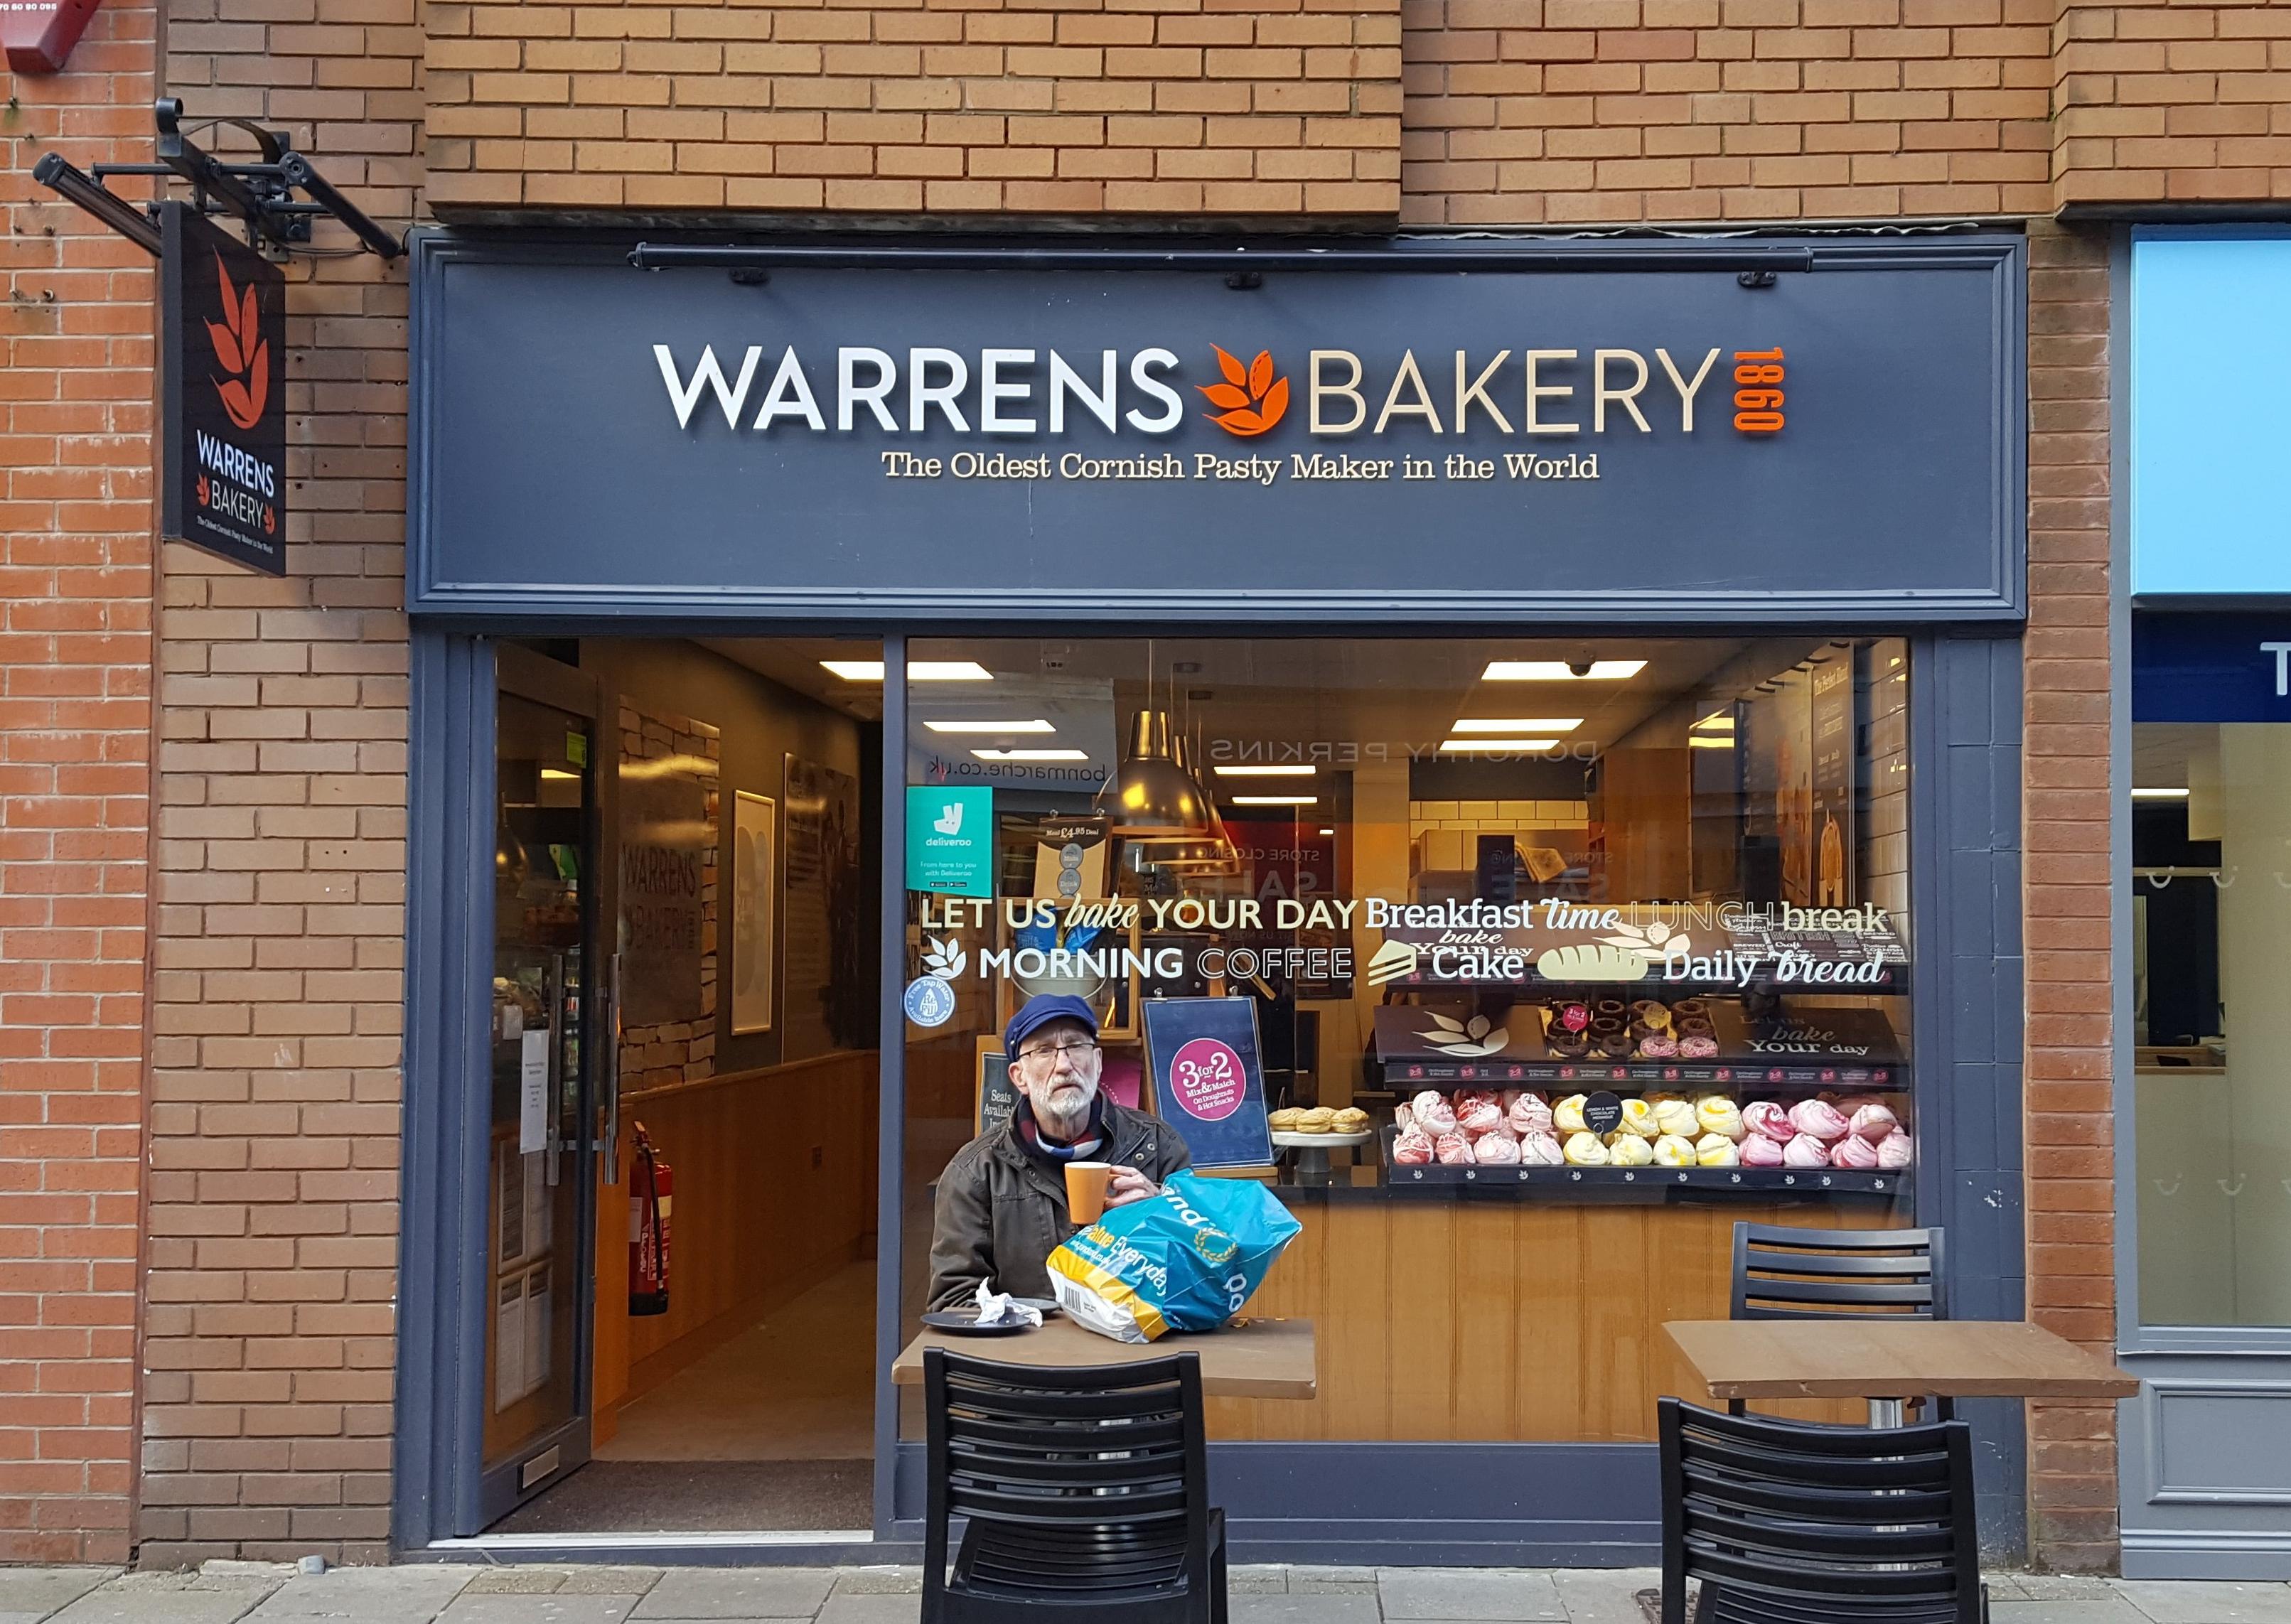 Warren's Bakery came to Montague Street in February 2019 and has been serving delicious treats ever since